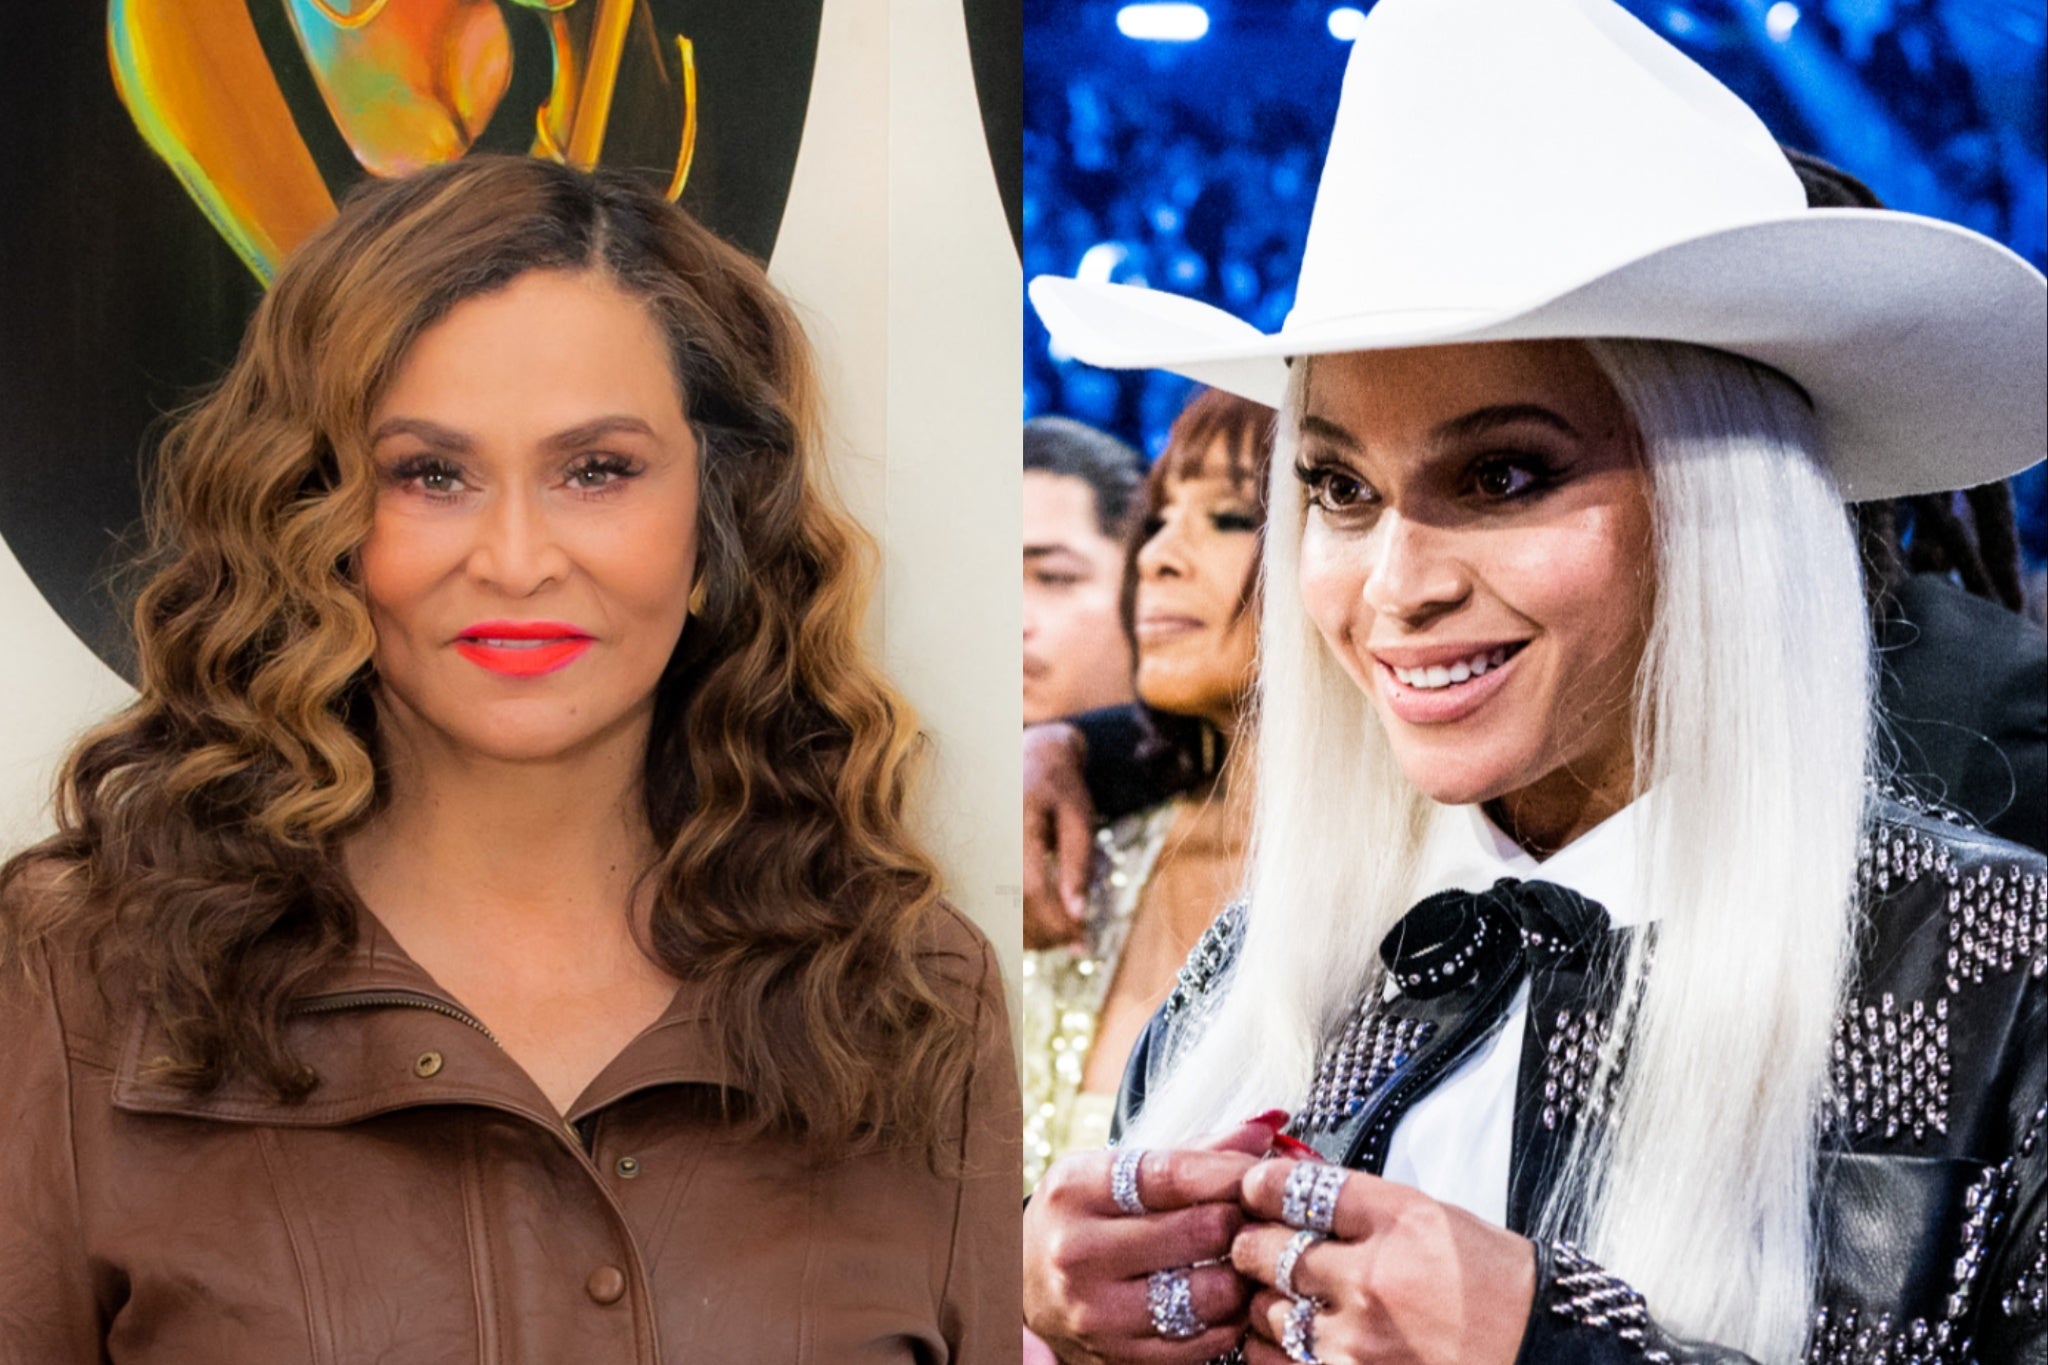 Keeping mum: Tina Knowles has shared a new hint about daughter Beyoncé’s new music